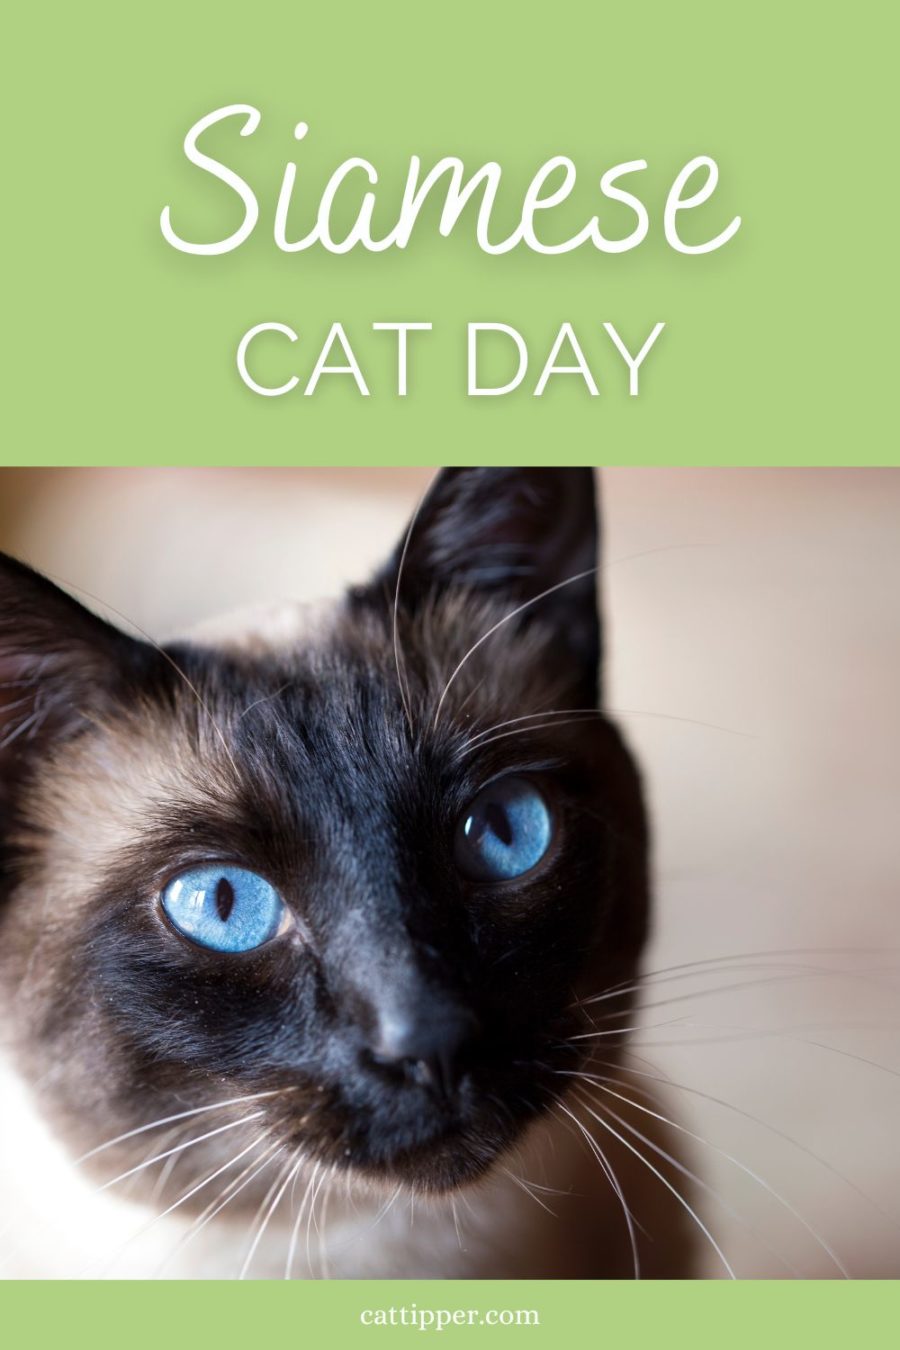 photo of siamese cat with words siamese cat day at top of image